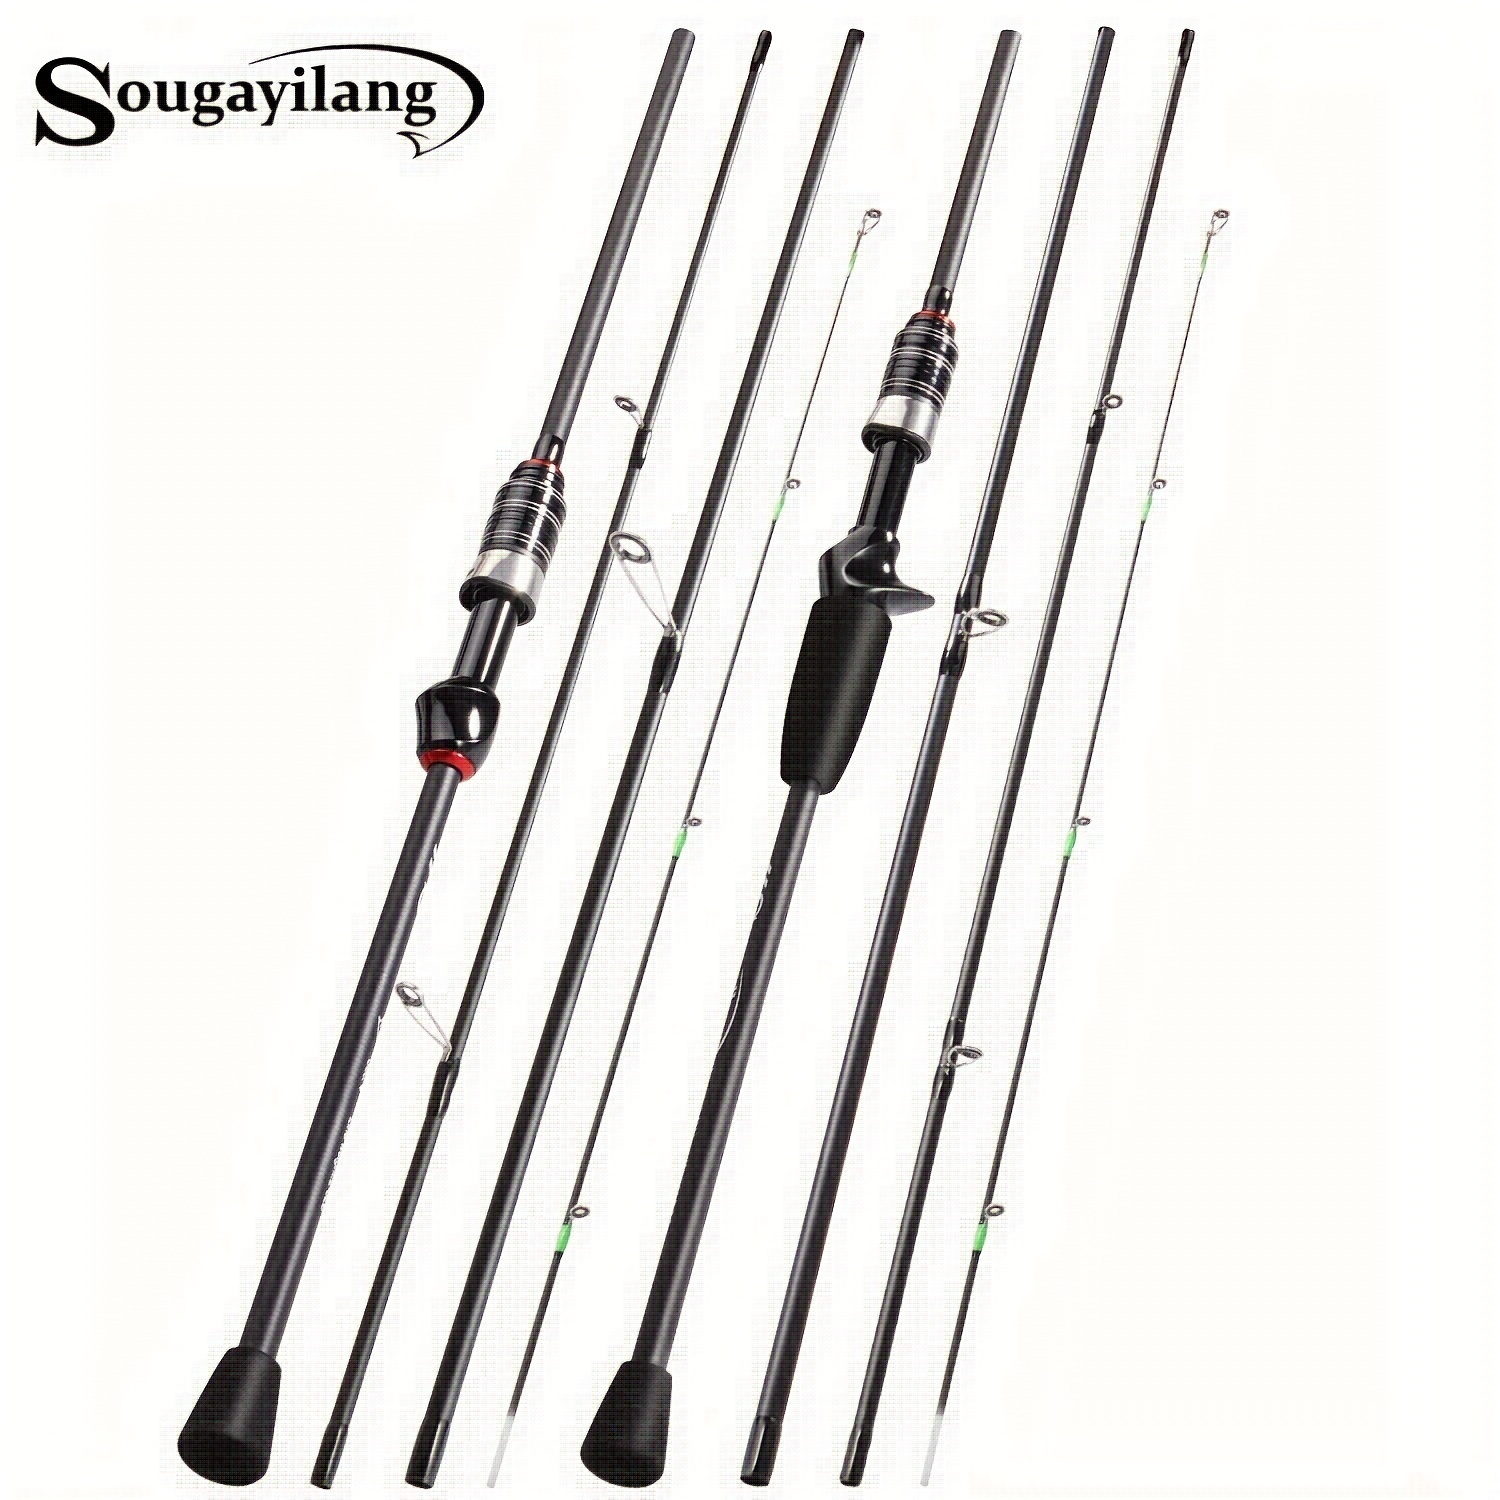 

Sougayilang 4 Sections Fishing Rod, 2.1m/6.89ft Ultralight Carbon Rod, Casting Spinning Fishing Pole For Bass Carp Saltwater Freshwater Travel Fishing Rod